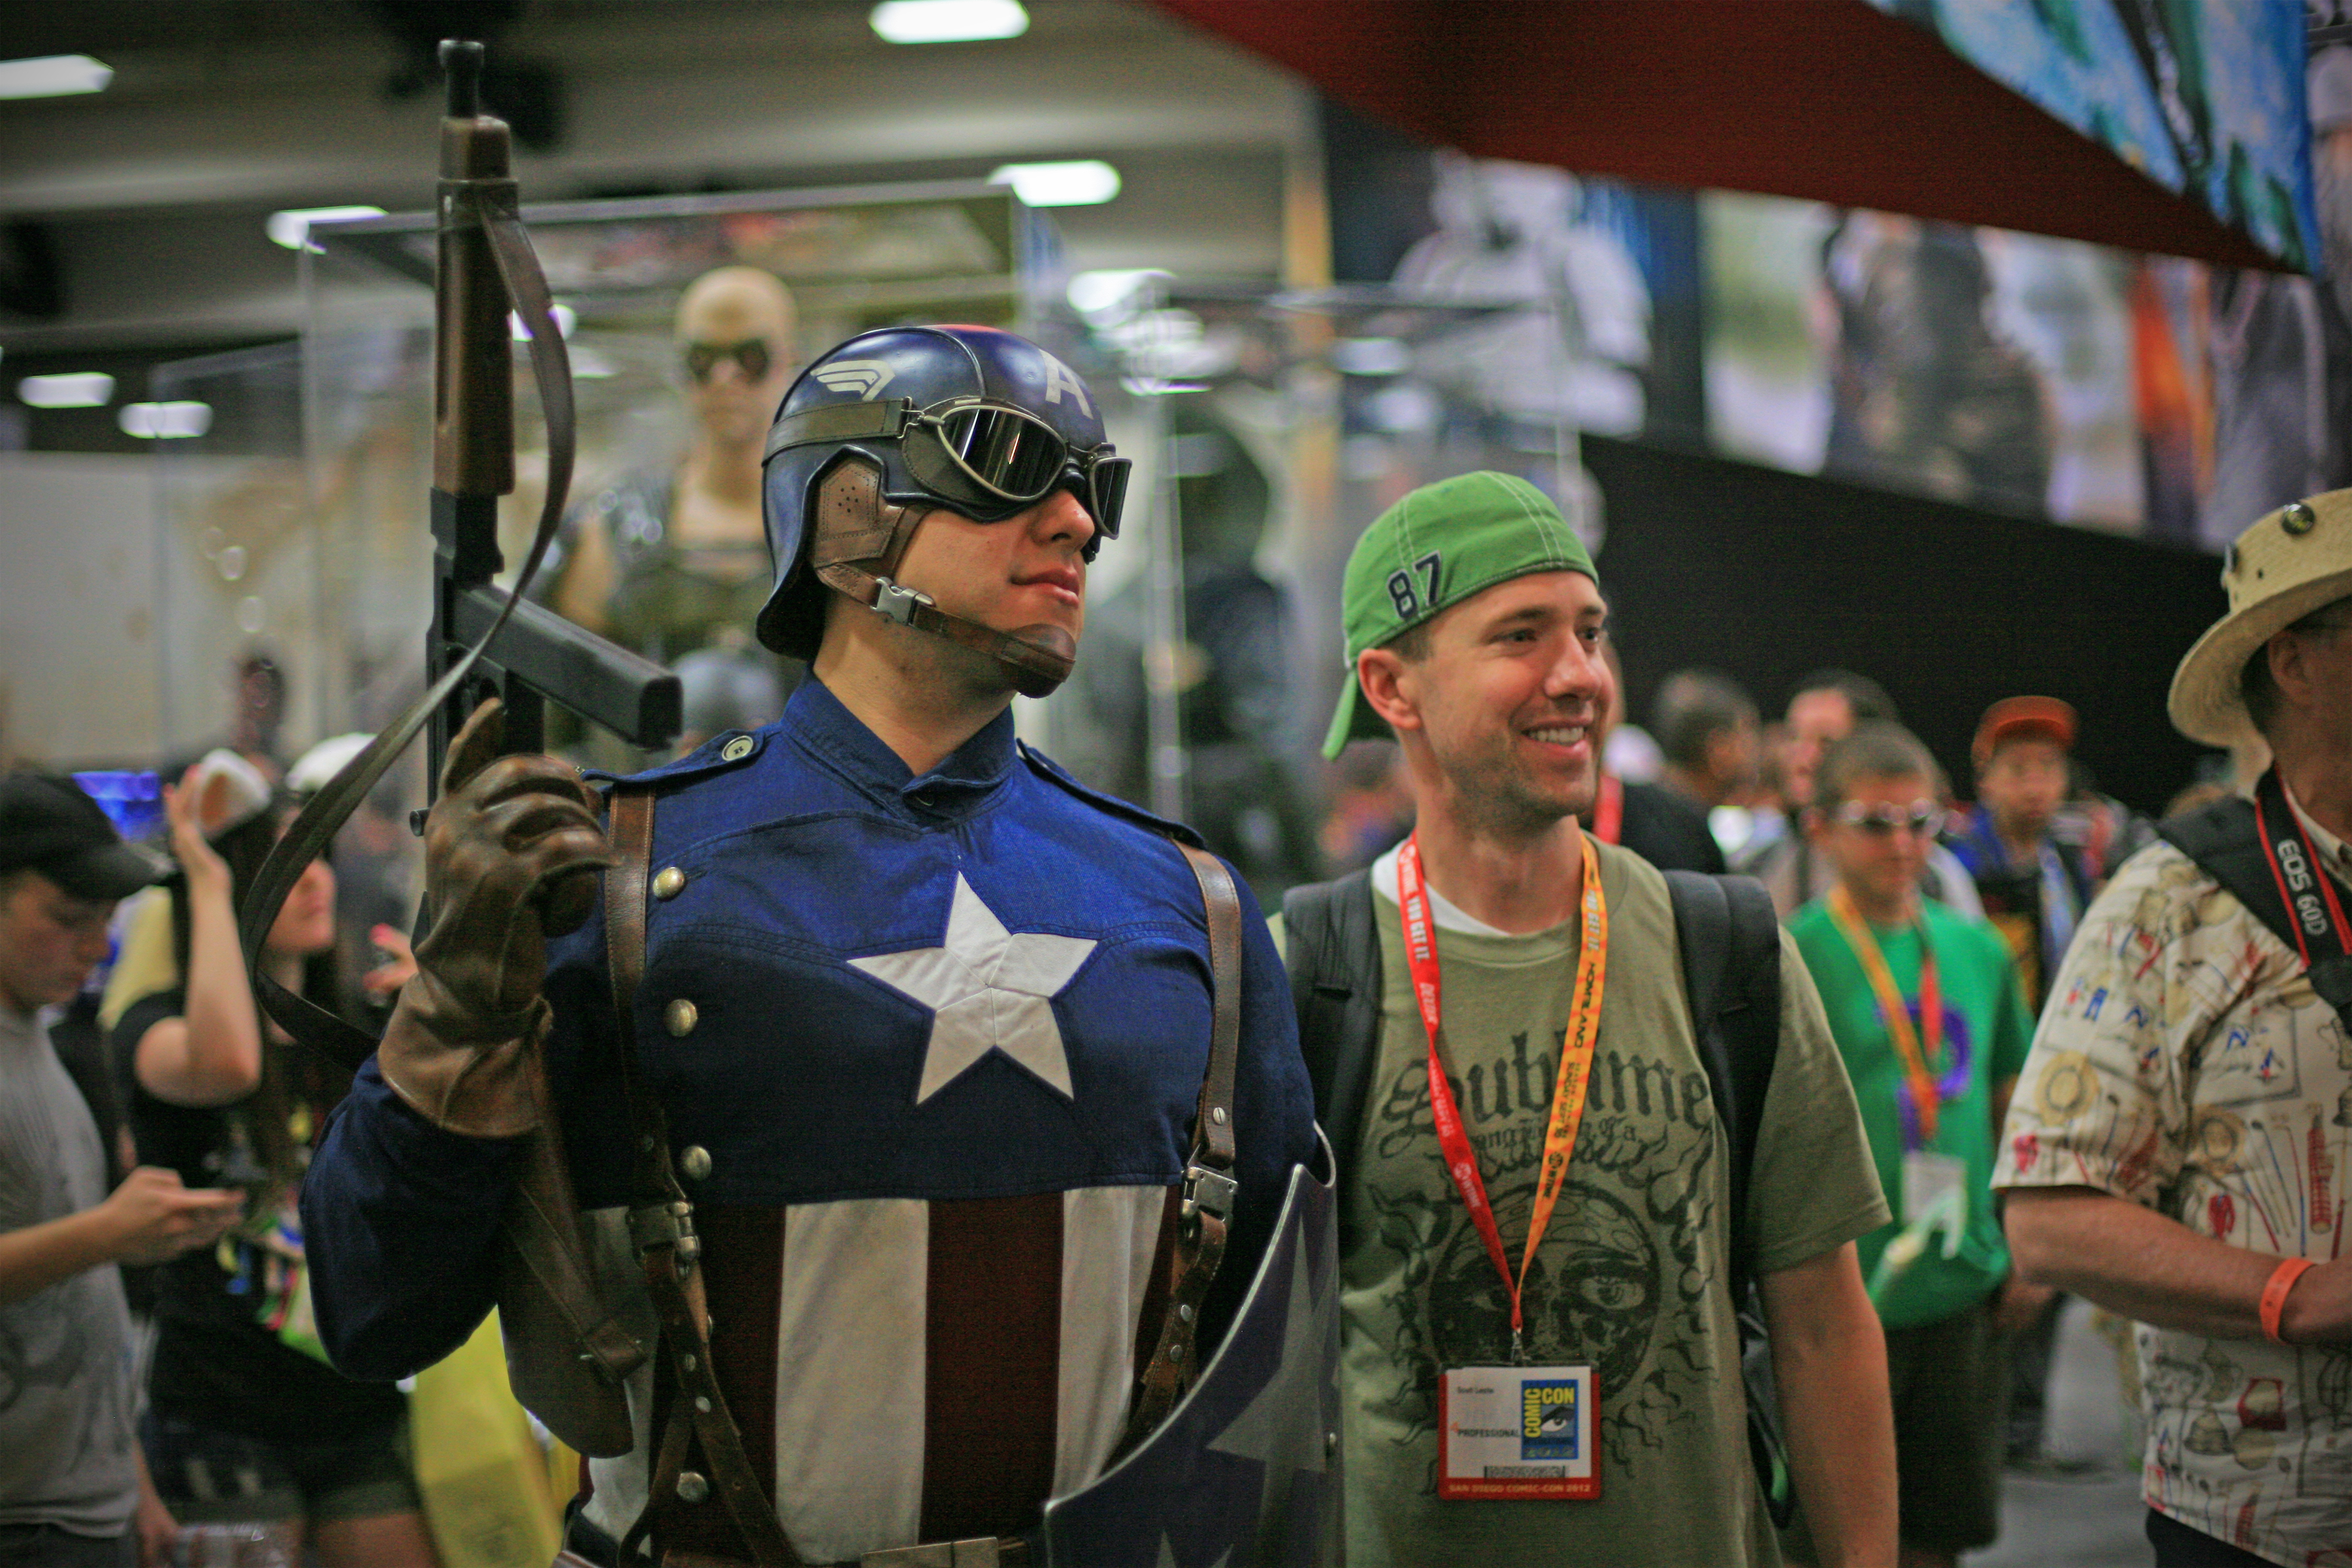 Captain America - San Diego Comic-Con International - Top Things to Do